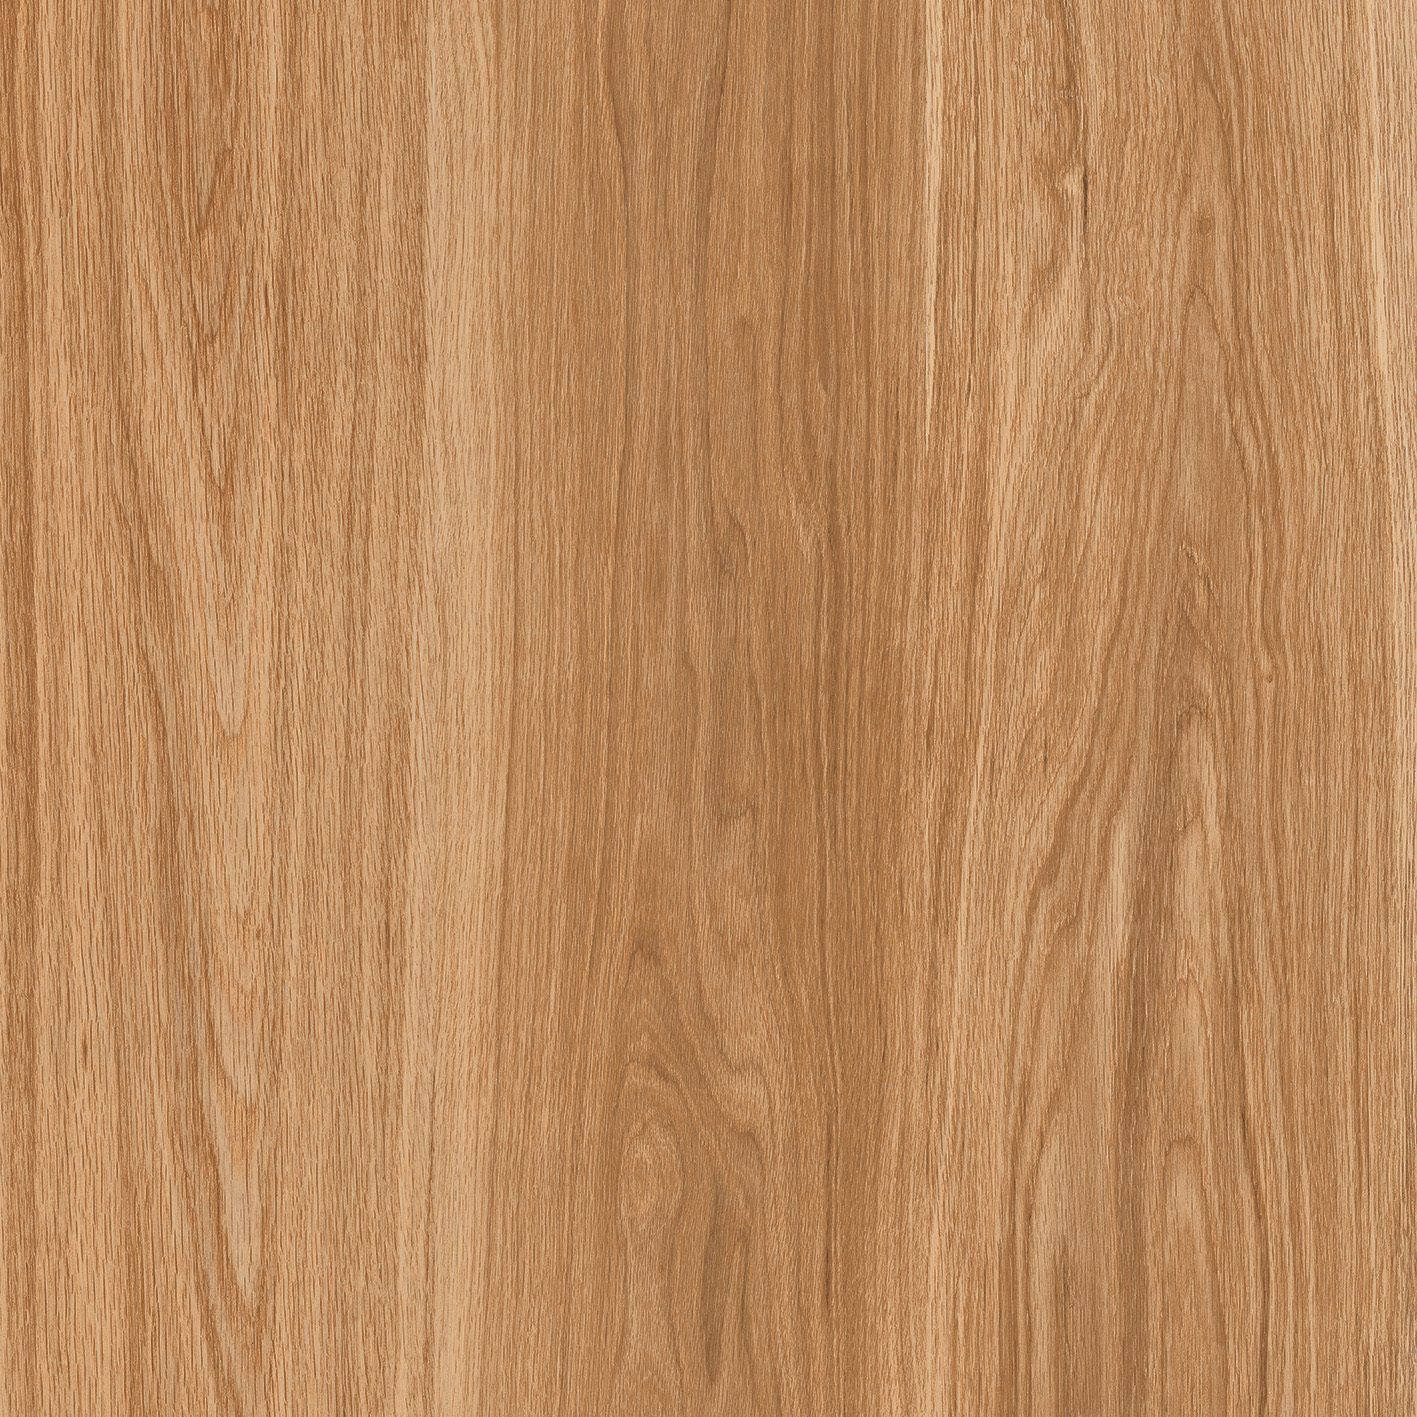 Bricolla Wood Brown 600x600mm Glossy Porcelain Tiles